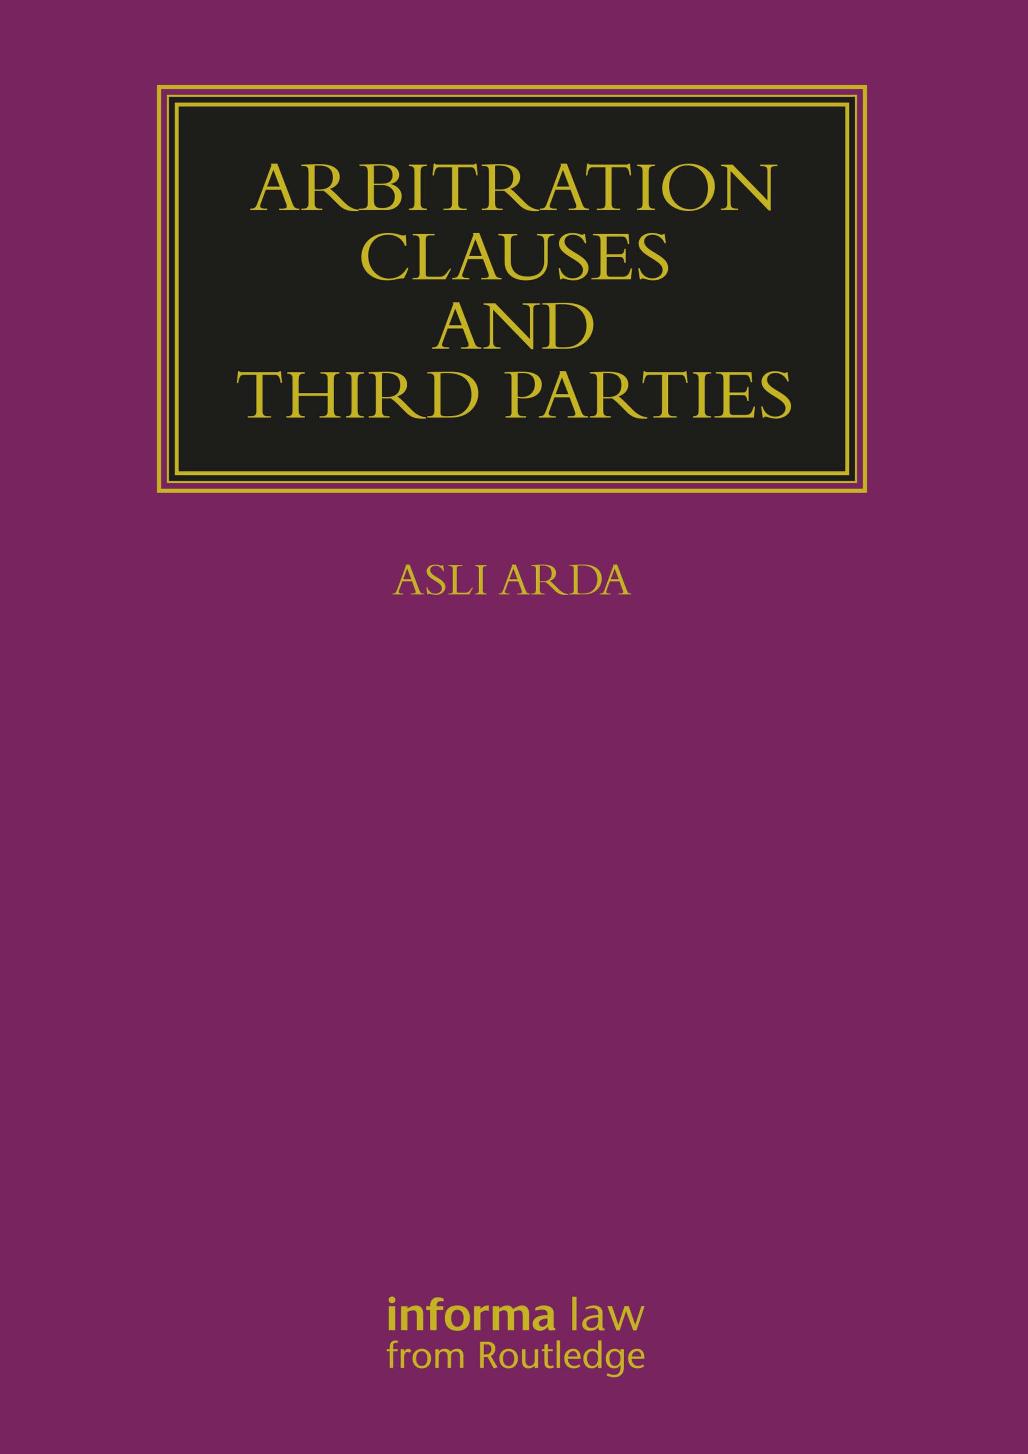 Arbitration Clauses and Third Parties (Lloyd's Arbitration Law Library) by Asli Arda